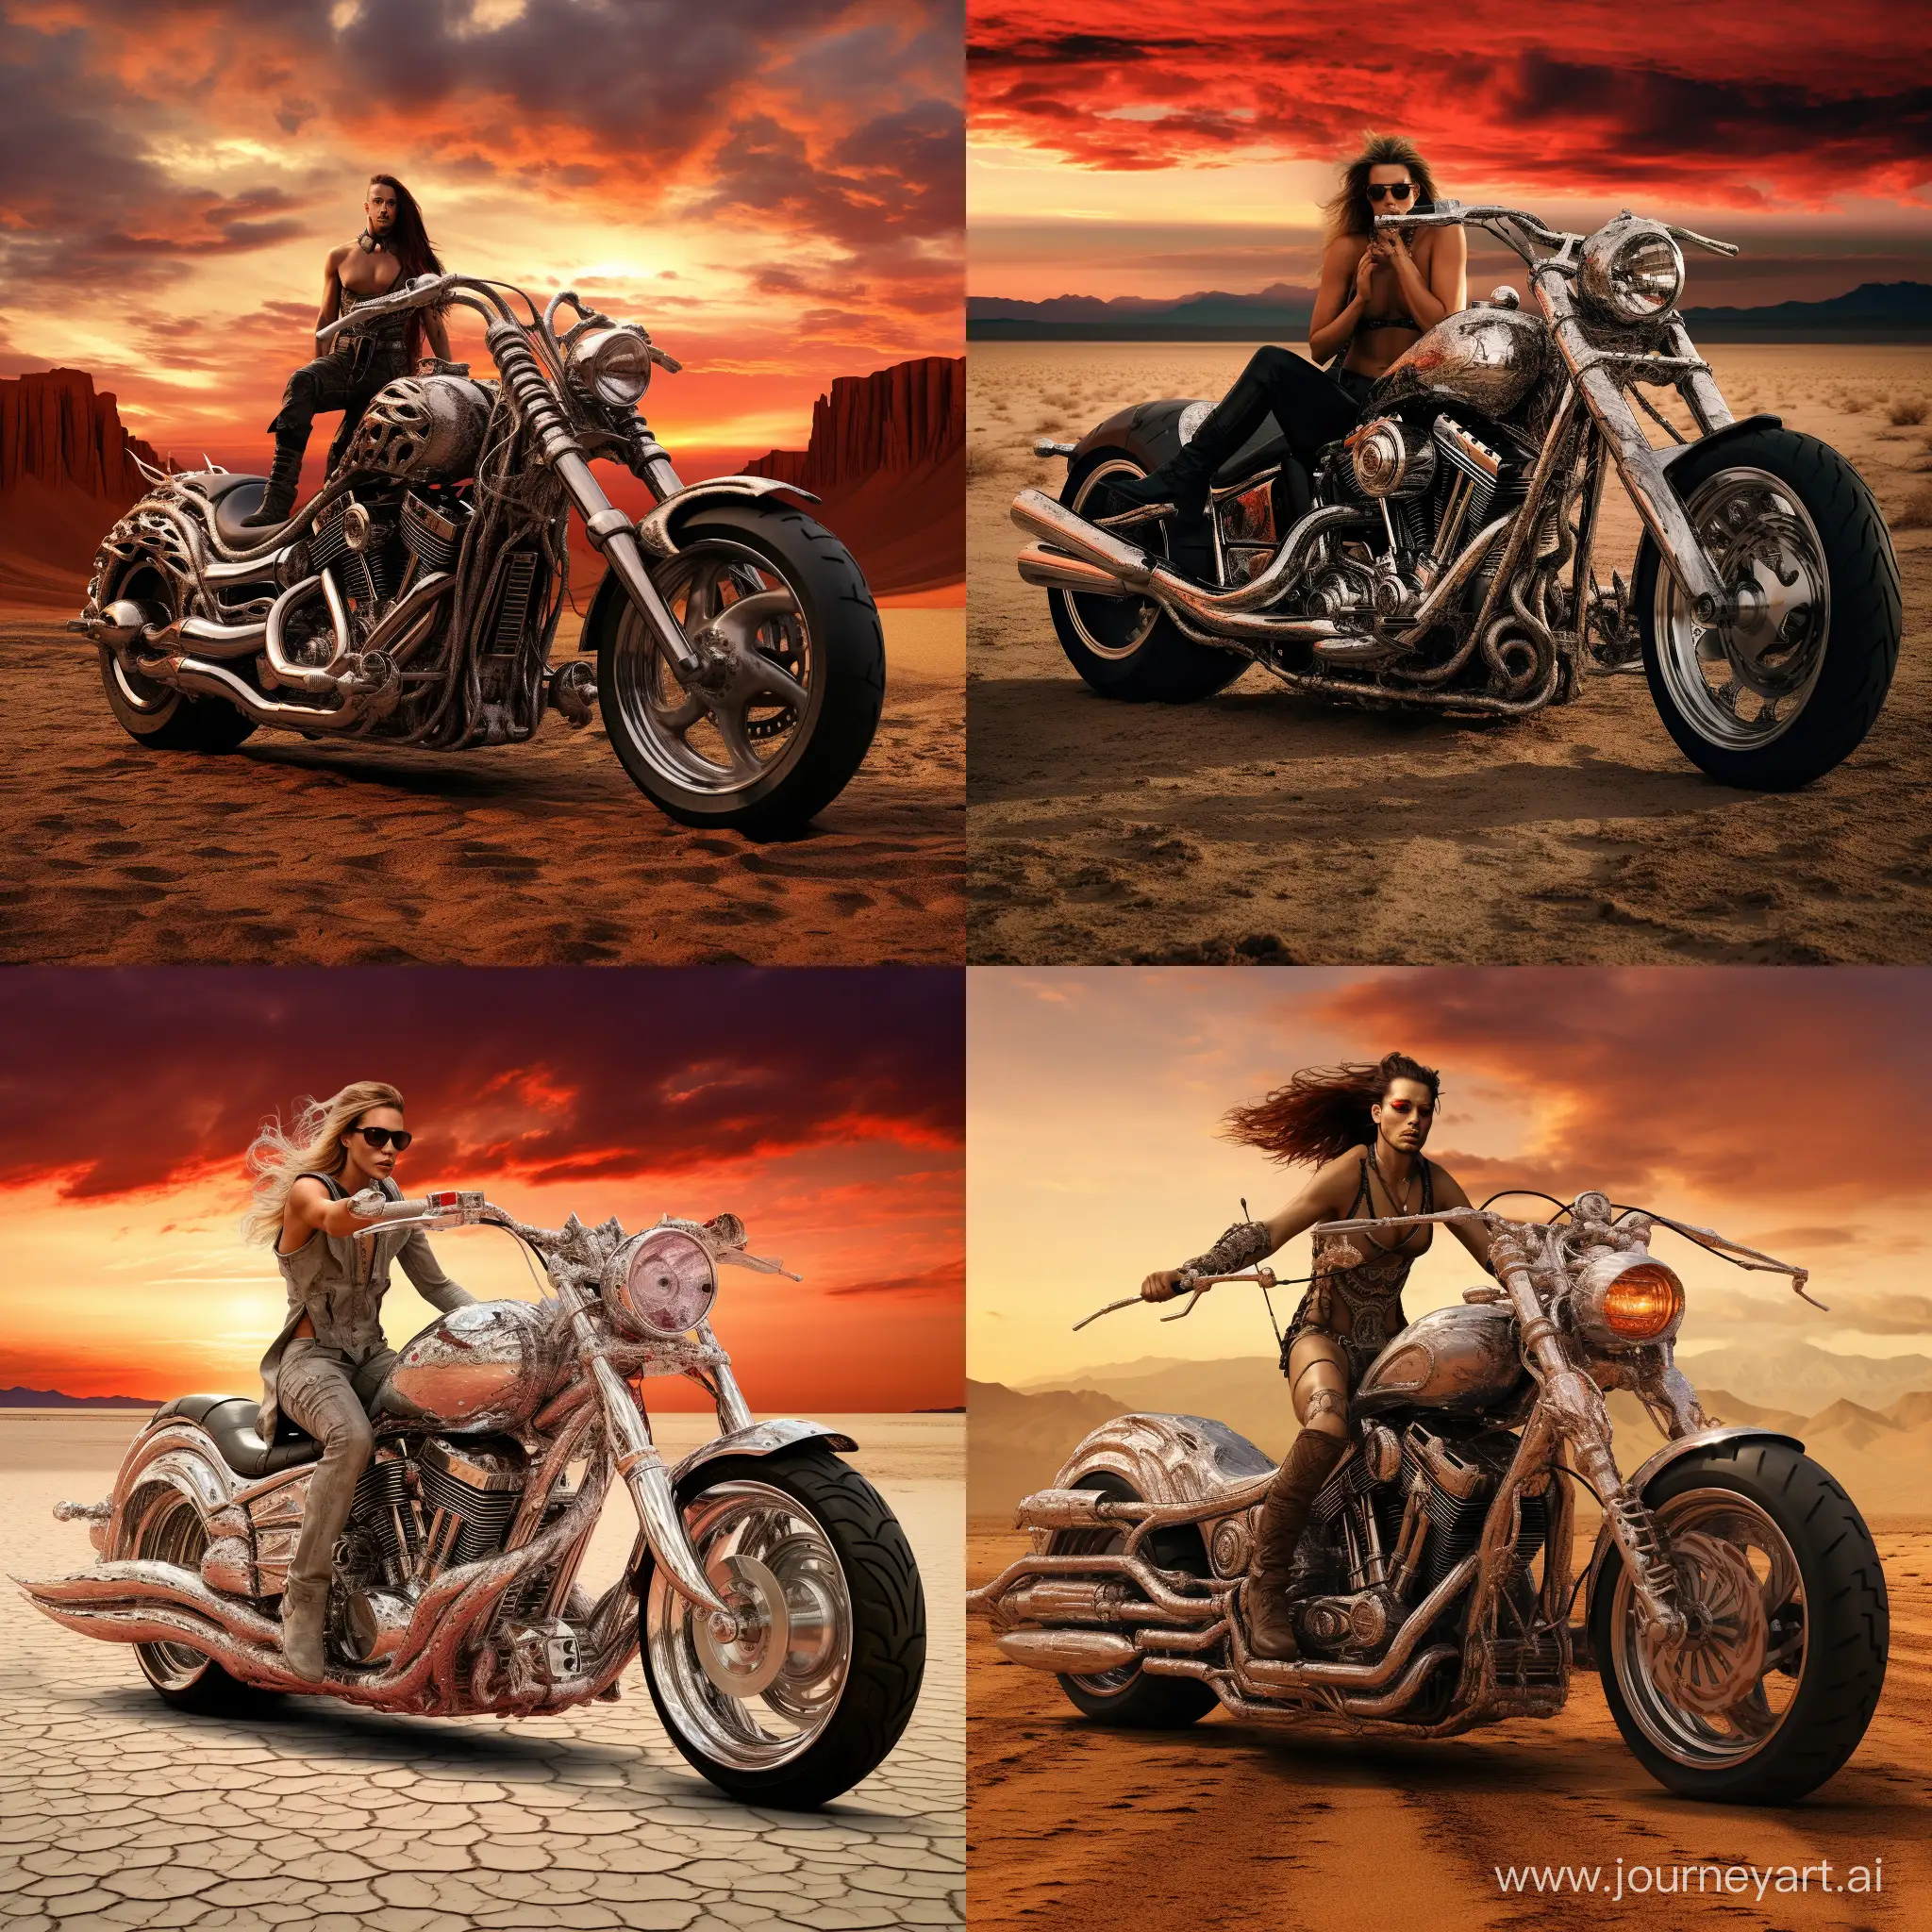 The devilish demon is on fire and riding a Chrome, low-rider motorcycle. With his girlfriend riding behind him. Powerful, extremely oversized tires, chrome spoke rims, chrome exhaust pipes. Extremely powerful engine. The day is stormy, and dark, and is a desert sky with multiple lightning bursts, covering the landscape background
